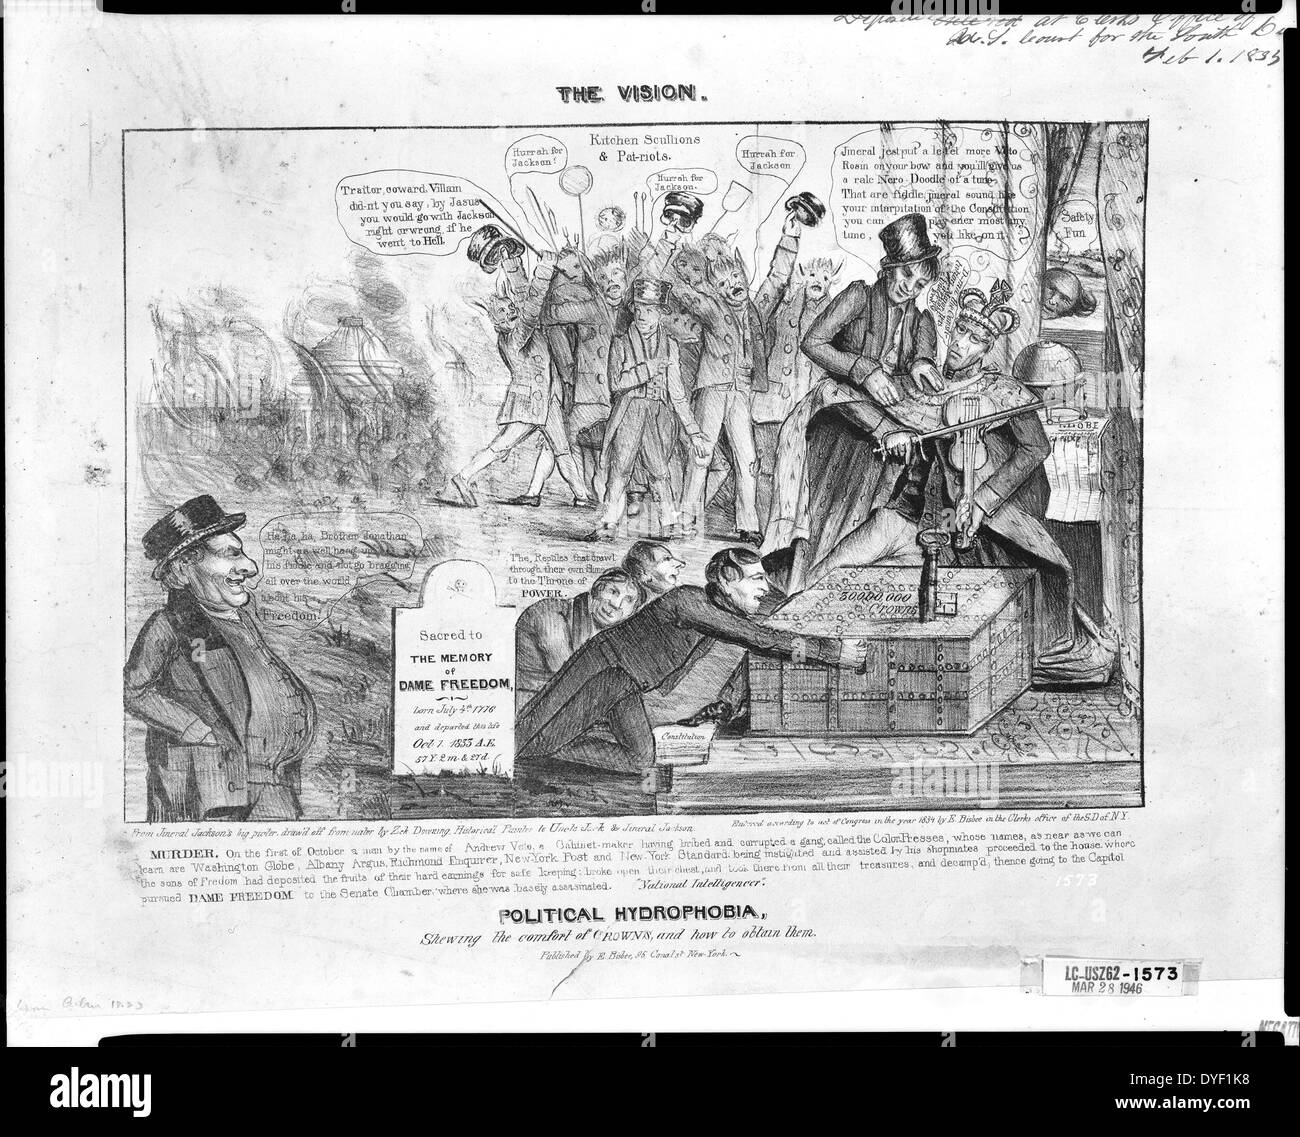 The vision. Political hydrophobia, shewing the comfort of crowns, and how to obtain them by Ezra Bizbee, 1834. Lithograph print on wove paper. A political cartoon satirising Jackson's veto of the re-charter of the US Bank. Attacking Jackson and Van Buren as the bethroned destroyers of liberty. The cartoon also puts across an anti-Irish immigrant message, portraying them as unruly yobs who rally to Jackson's whims. Stock Photo